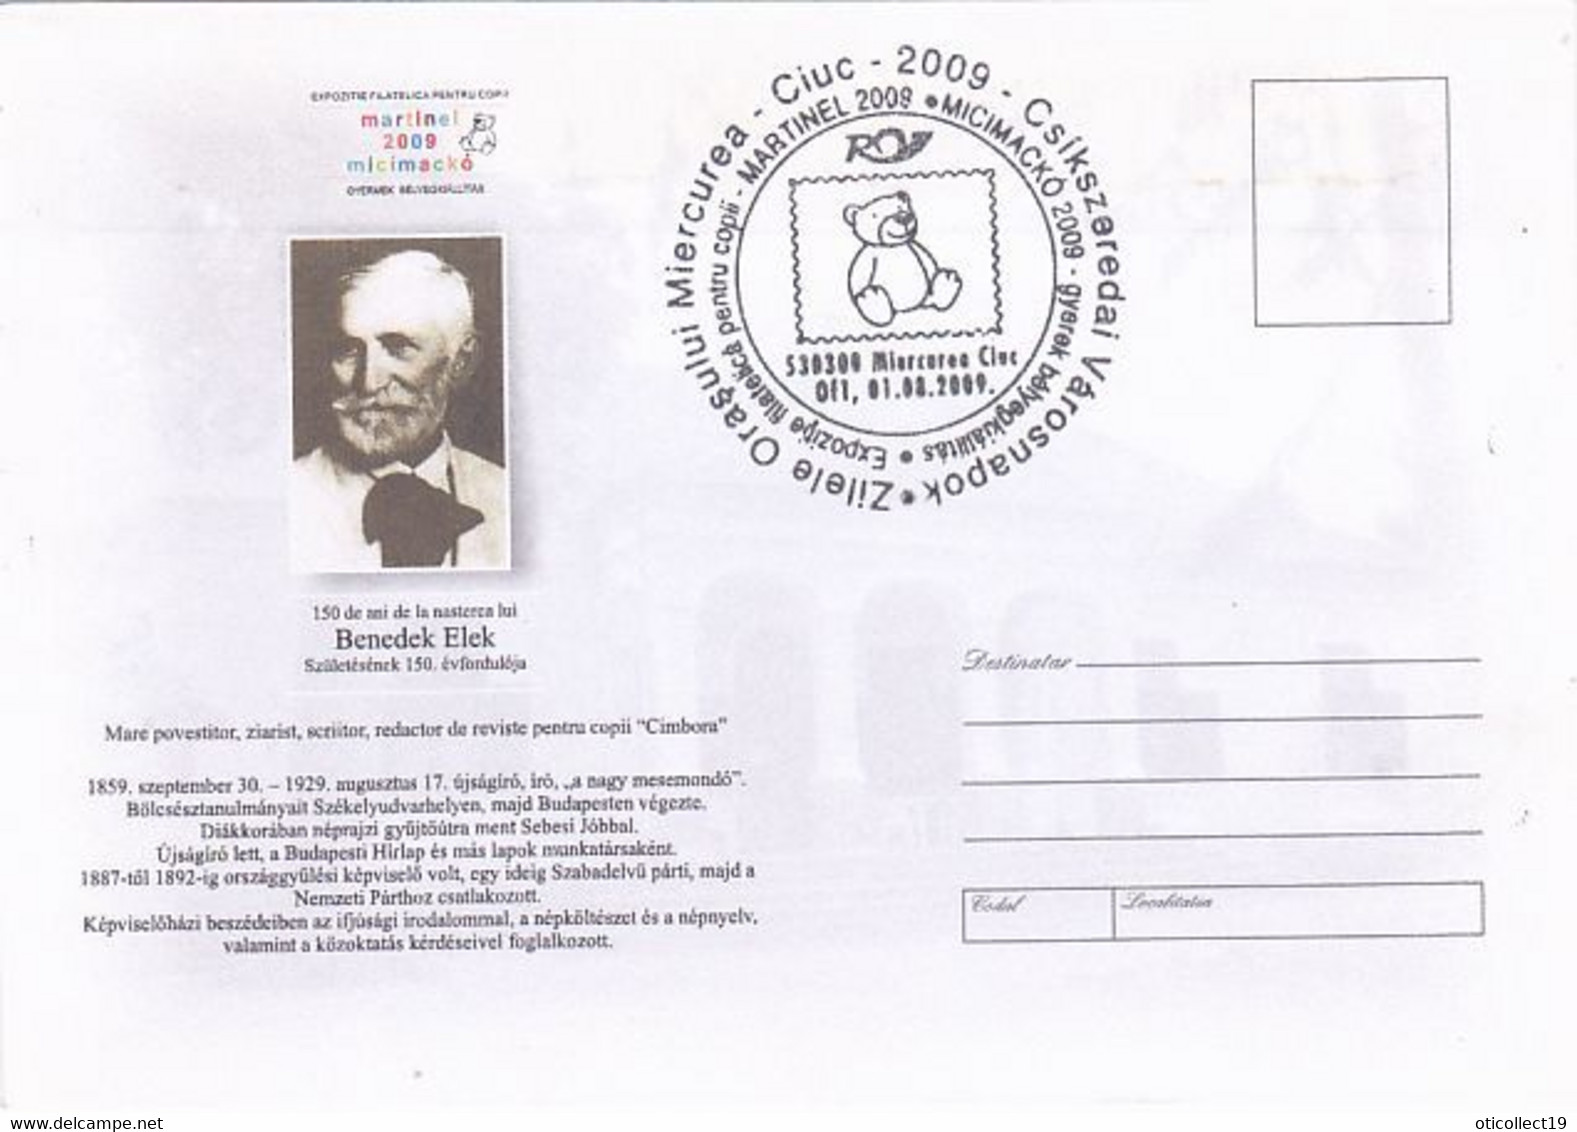 BENEDEK ELEK, WRITER, MARTINEL CHILDRENS PHILATELIC EXHIBITION, SPECIAL COVER, 2009, ROMANIA - Covers & Documents